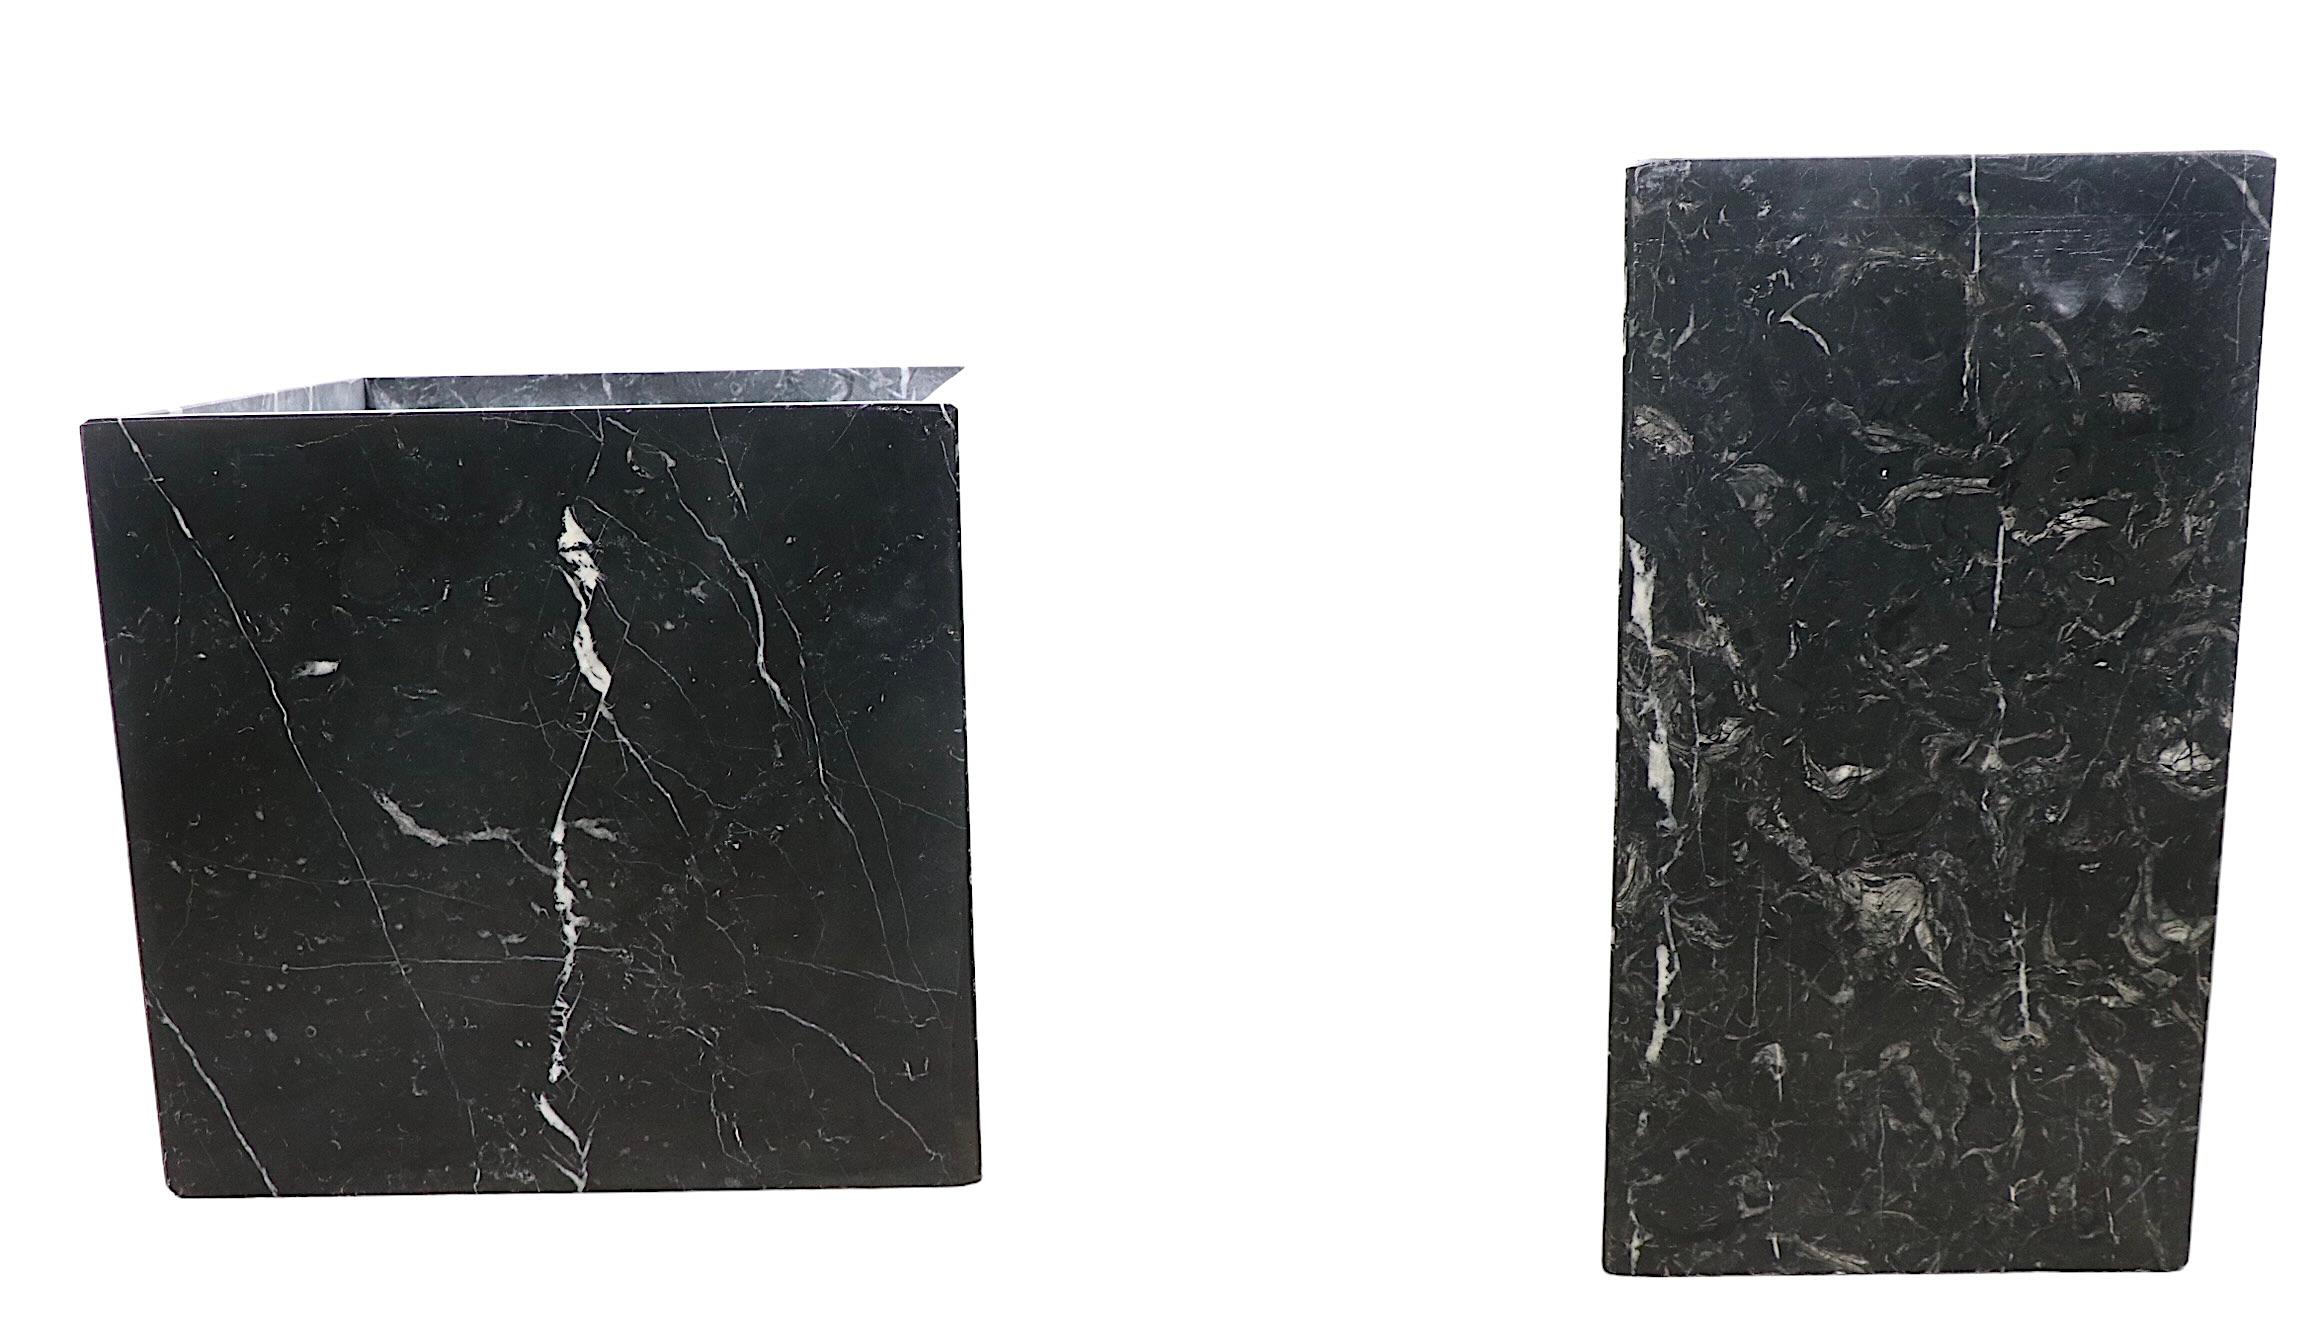 Offering two rectangular table bases, which can also double as pedestals, planters, or whatever you can think of. The black marble columns are constructed of four slabs each, one is taller and more narrow ( 10.5 x 10.5 x 19 inches ) the other is